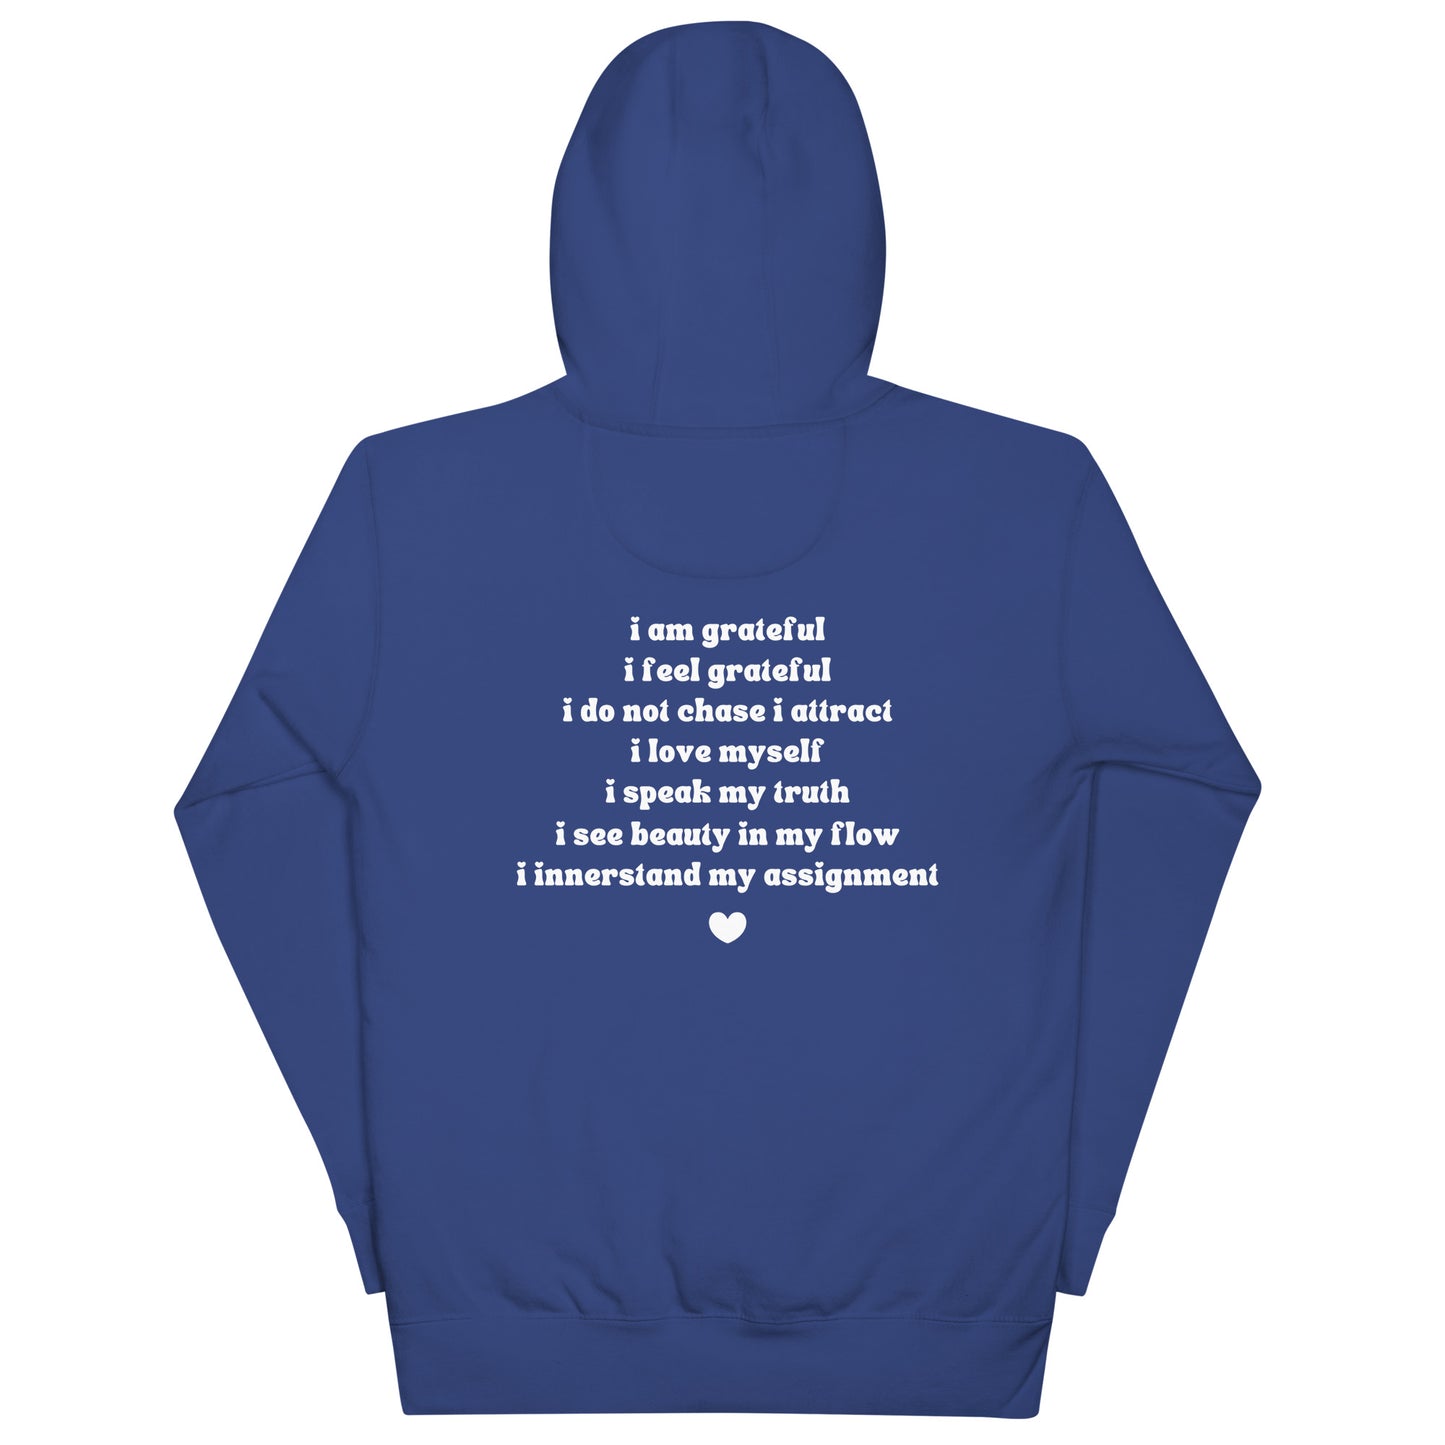 My Inner Peace is a non-negotiable Unisex Premium Hoodie